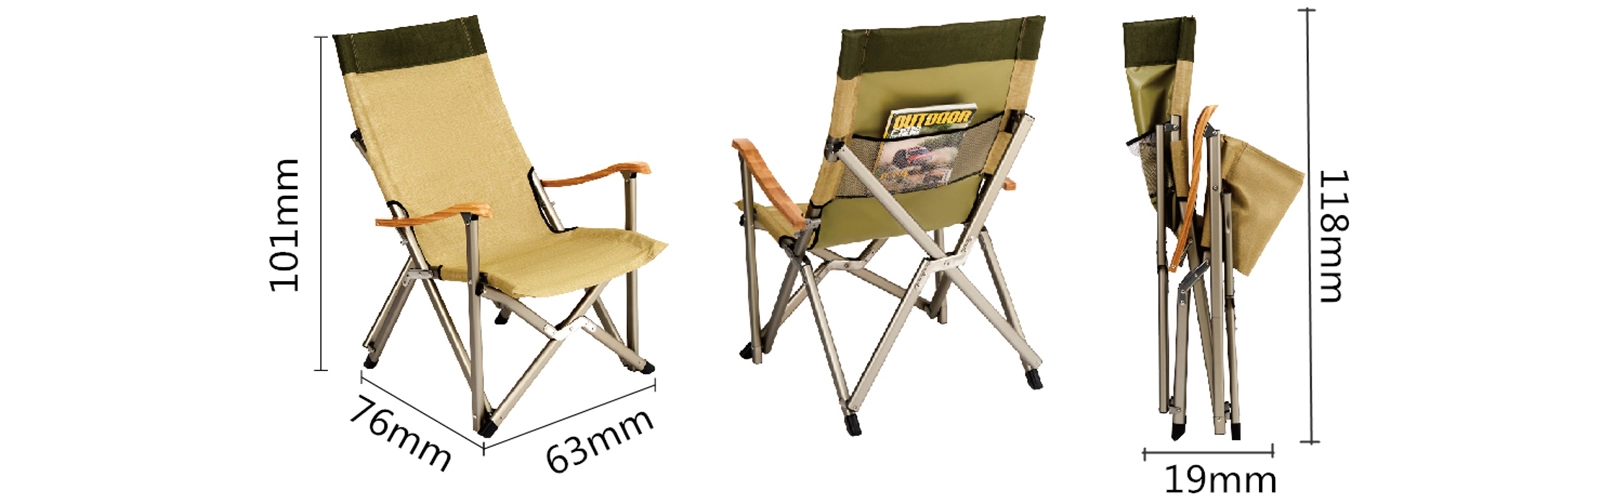 details of High-back Aluminum Camping Chair with Bamboo Armrest